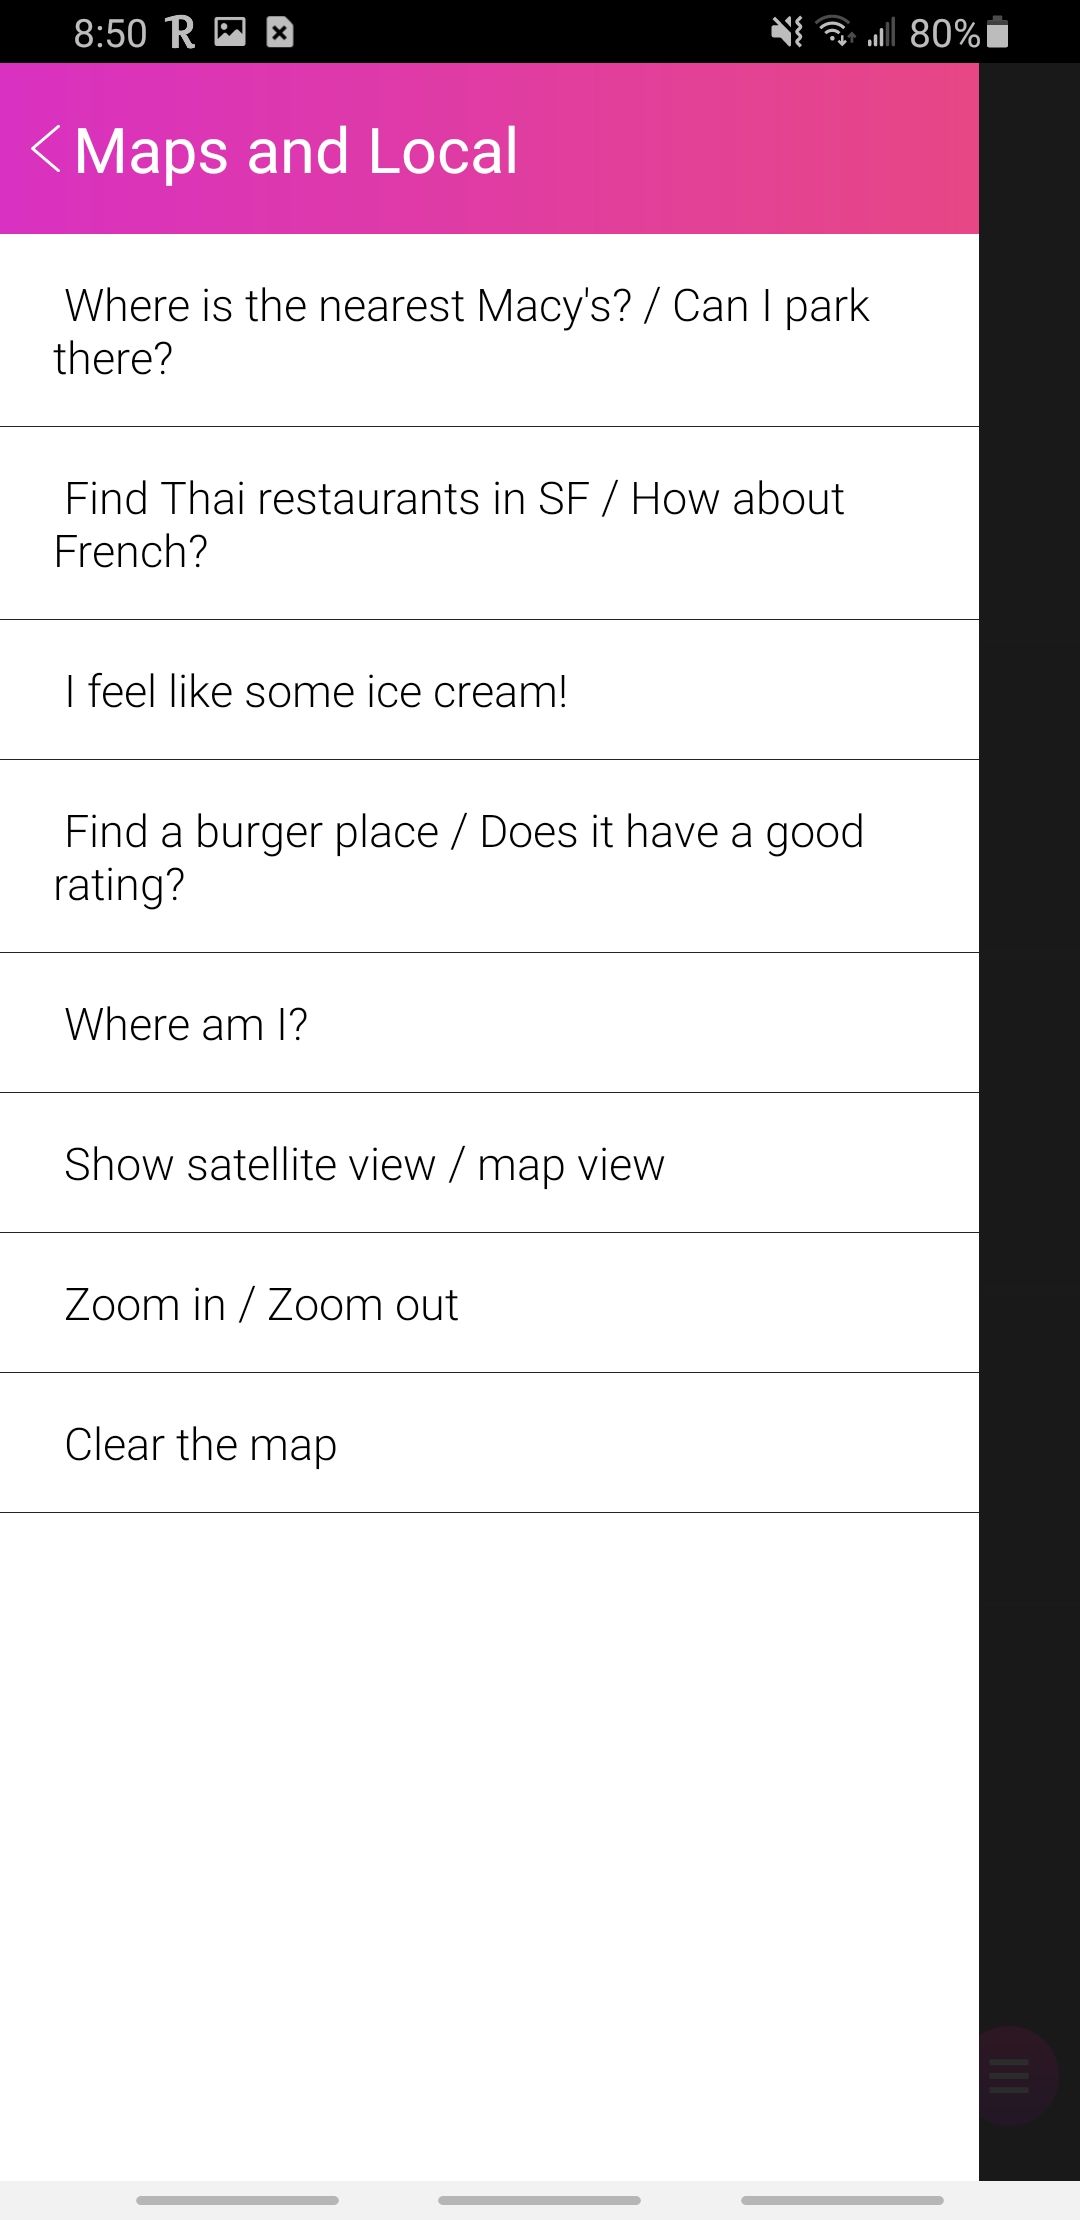 robin app maps and local command prompts